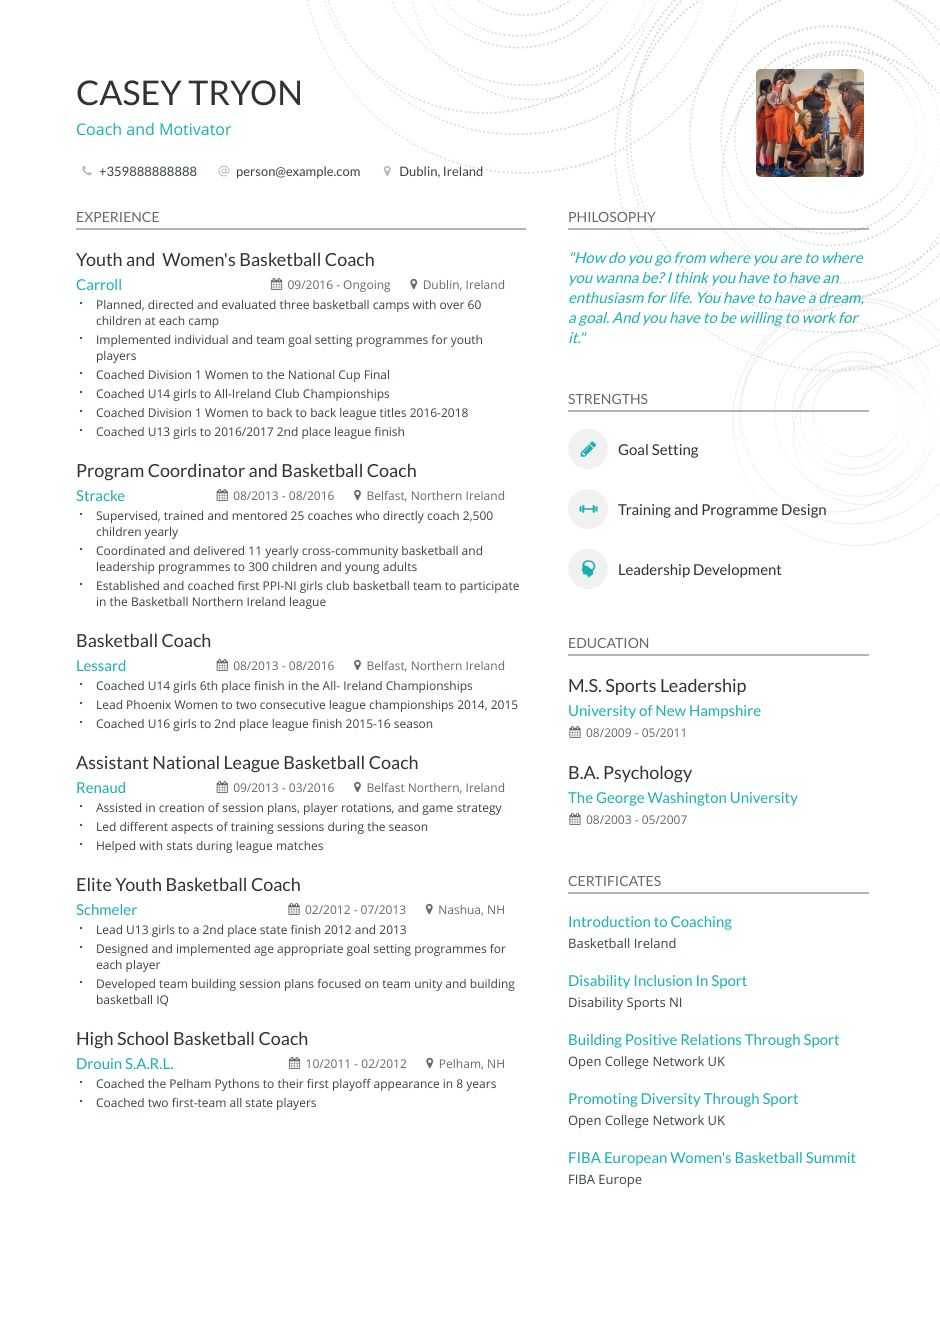 Sample Resume for Basketball Coaching Position Coaching Resume Examples [inside How-to Tips] Enhancv